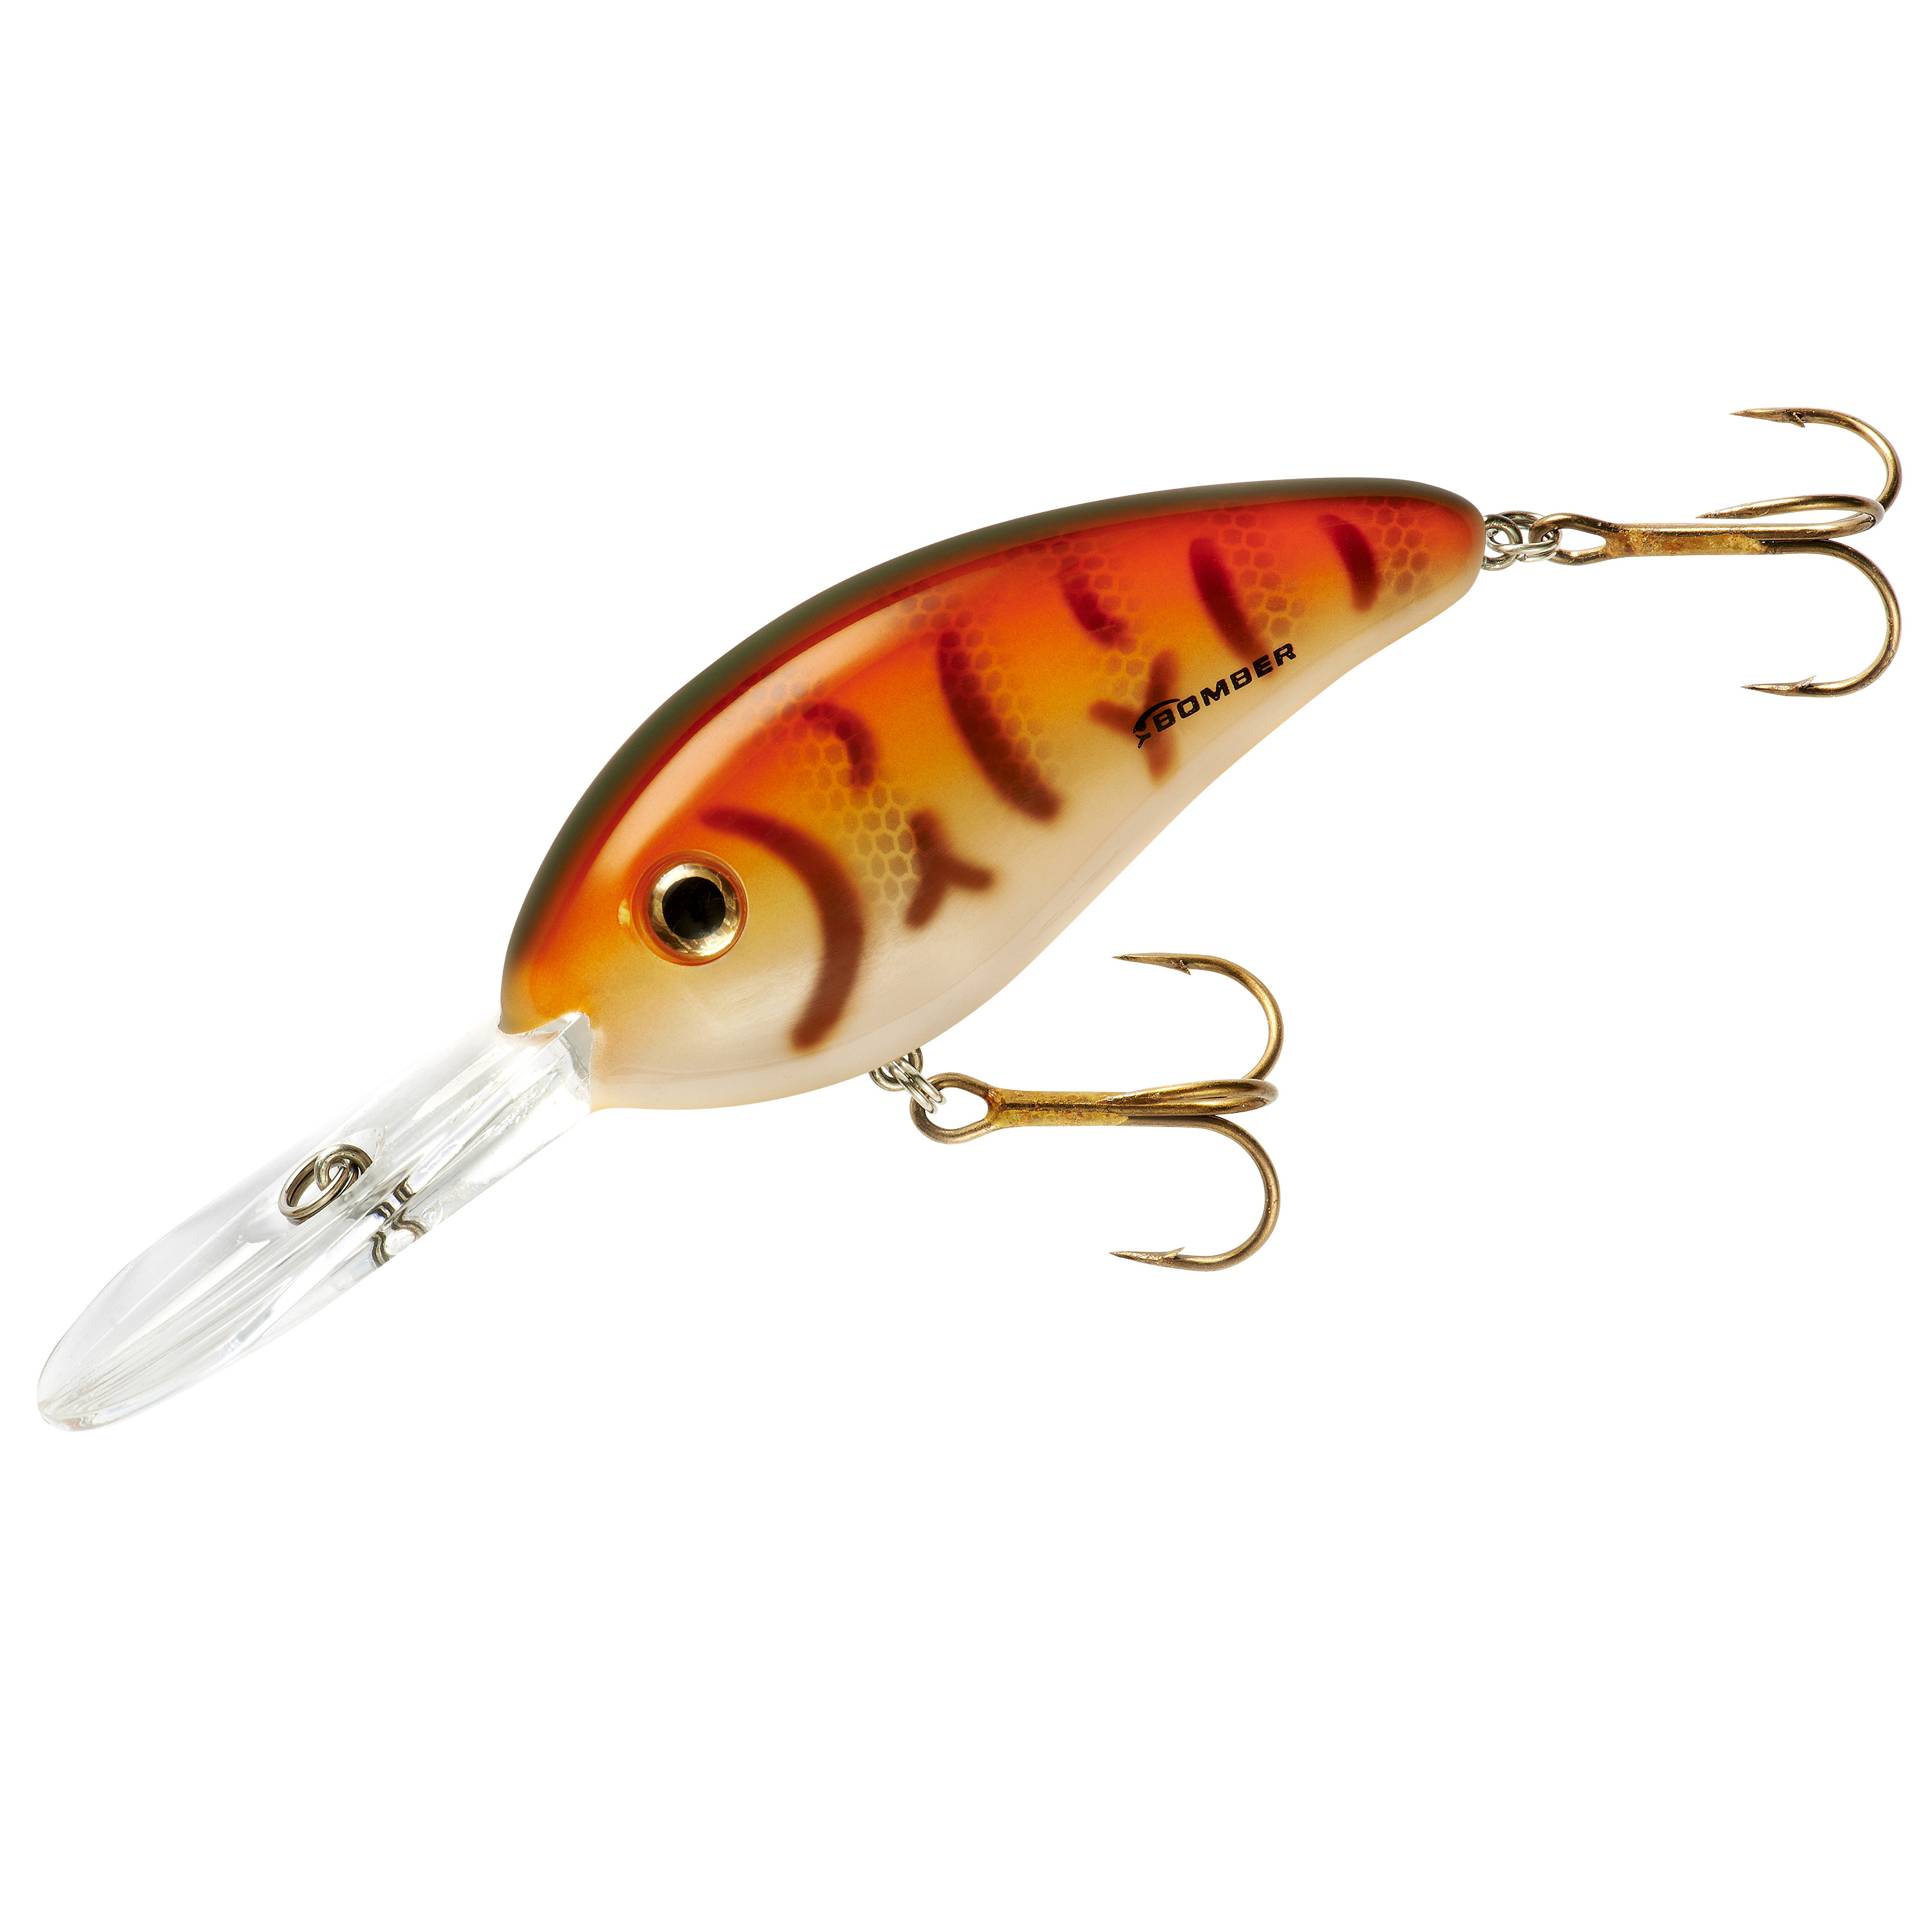  Bomber Fat Free Shad Fishing Lures (Grape Shad, 3-Inch) :  Fishing Topwater Lures And Crankbaits : Sports & Outdoors